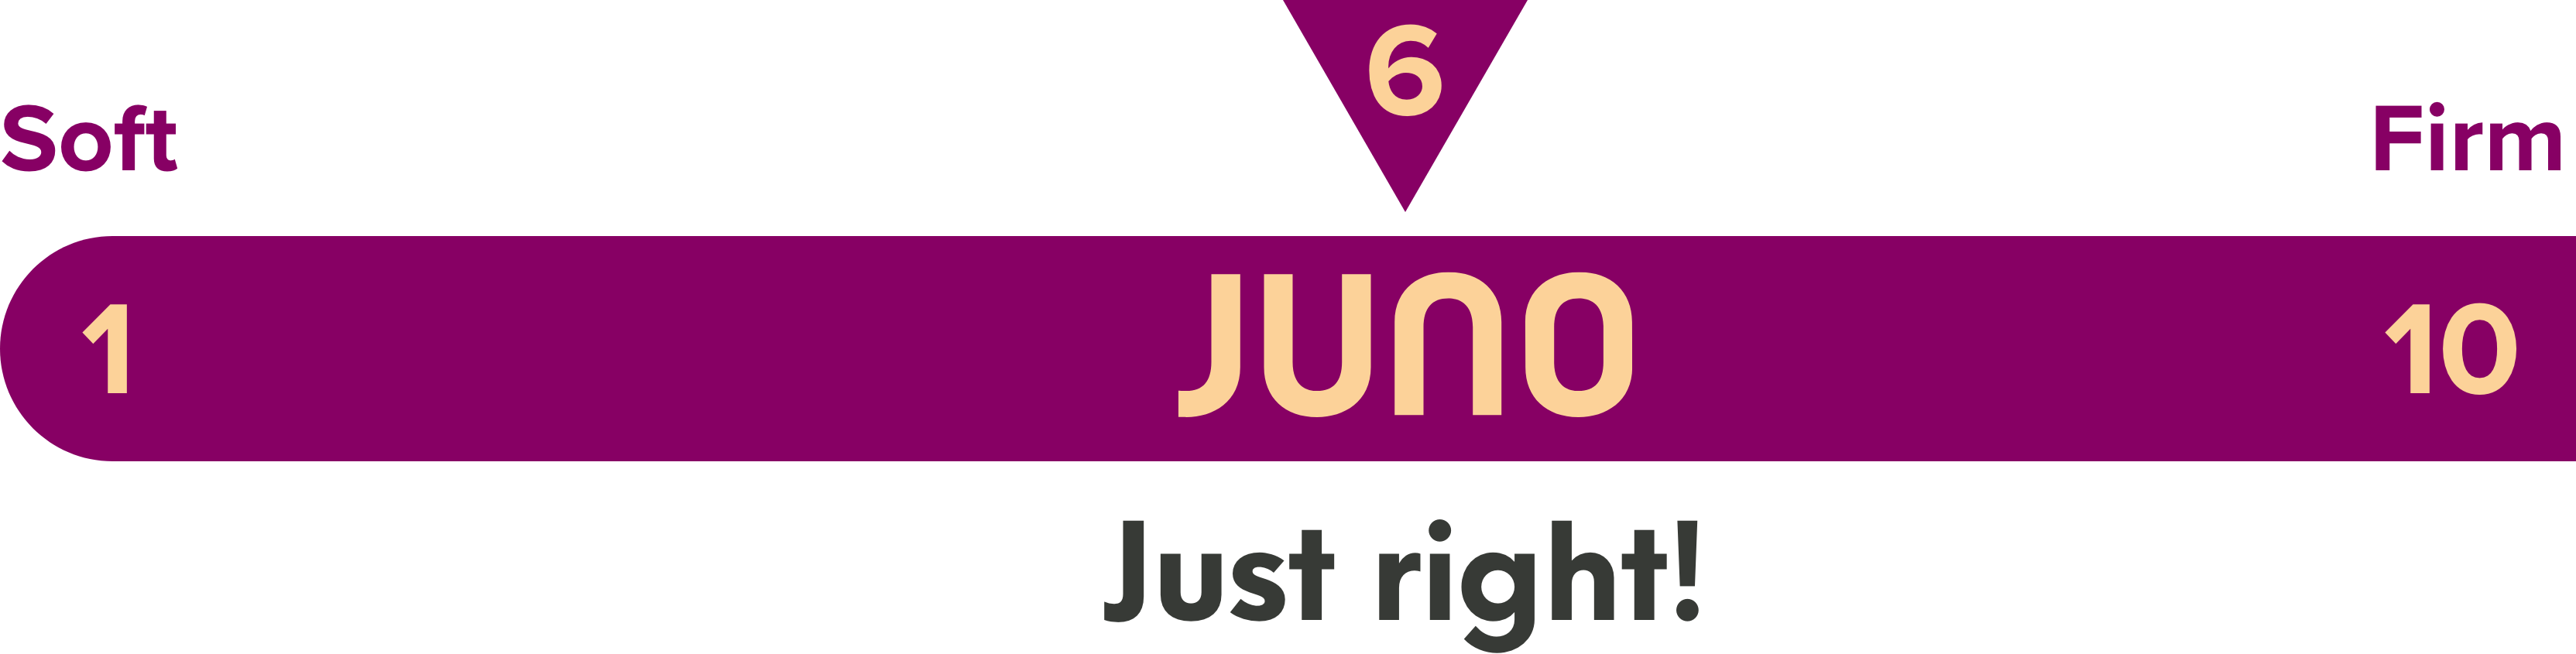 1:Soft | 10: Firm | Juno: Just right!